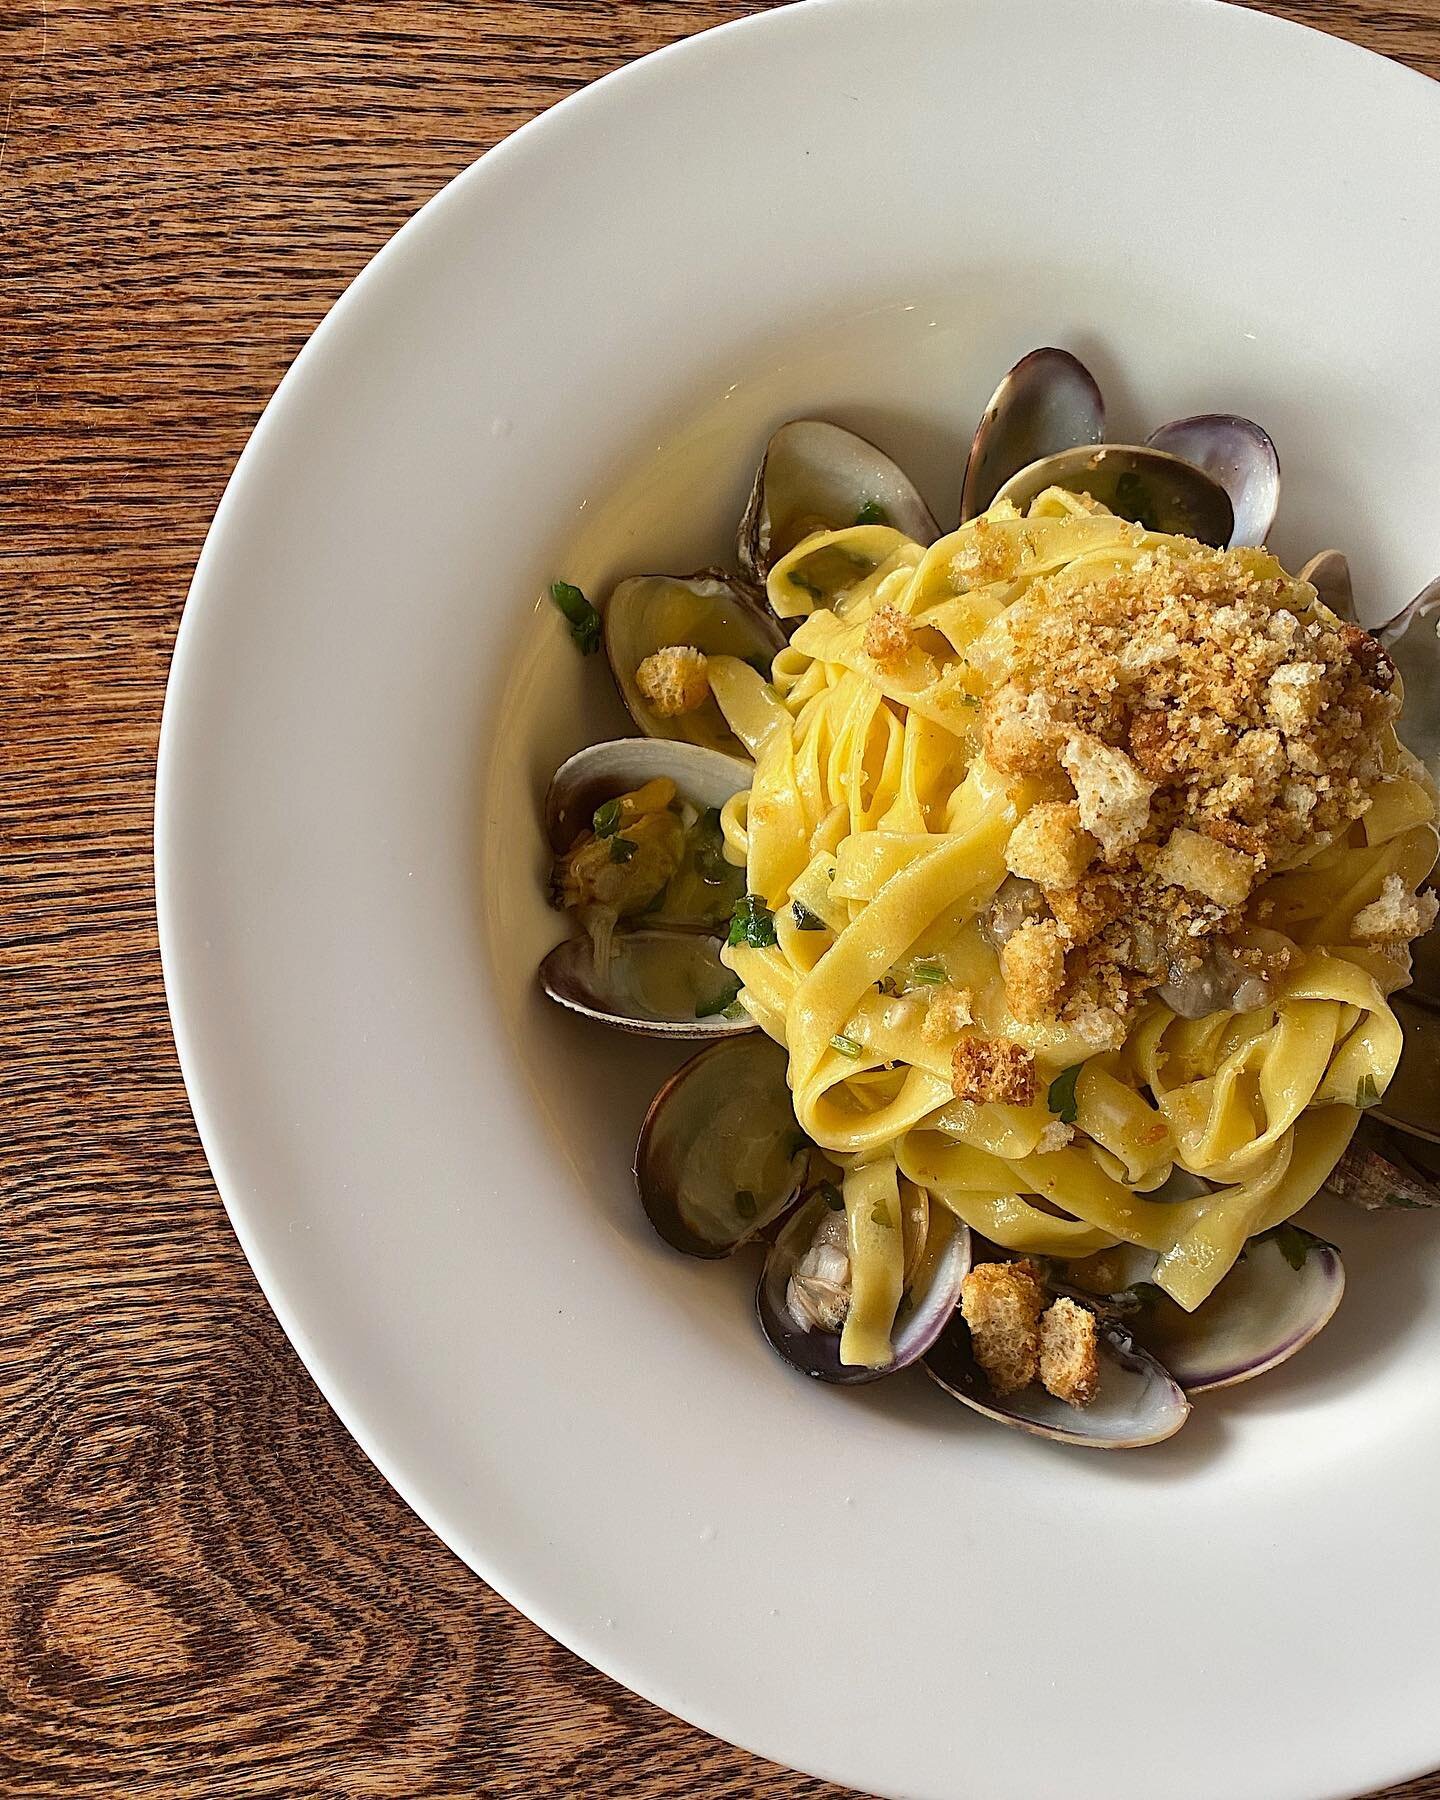 Fettuccine with clams is back!
Check out our fall dinner menu..🤍

P.s book your reservation on Resy

⠀
#clams #seafoodpasta #italianfood #brooklyngem#indoordining#fallmenu🍁🍃🍂